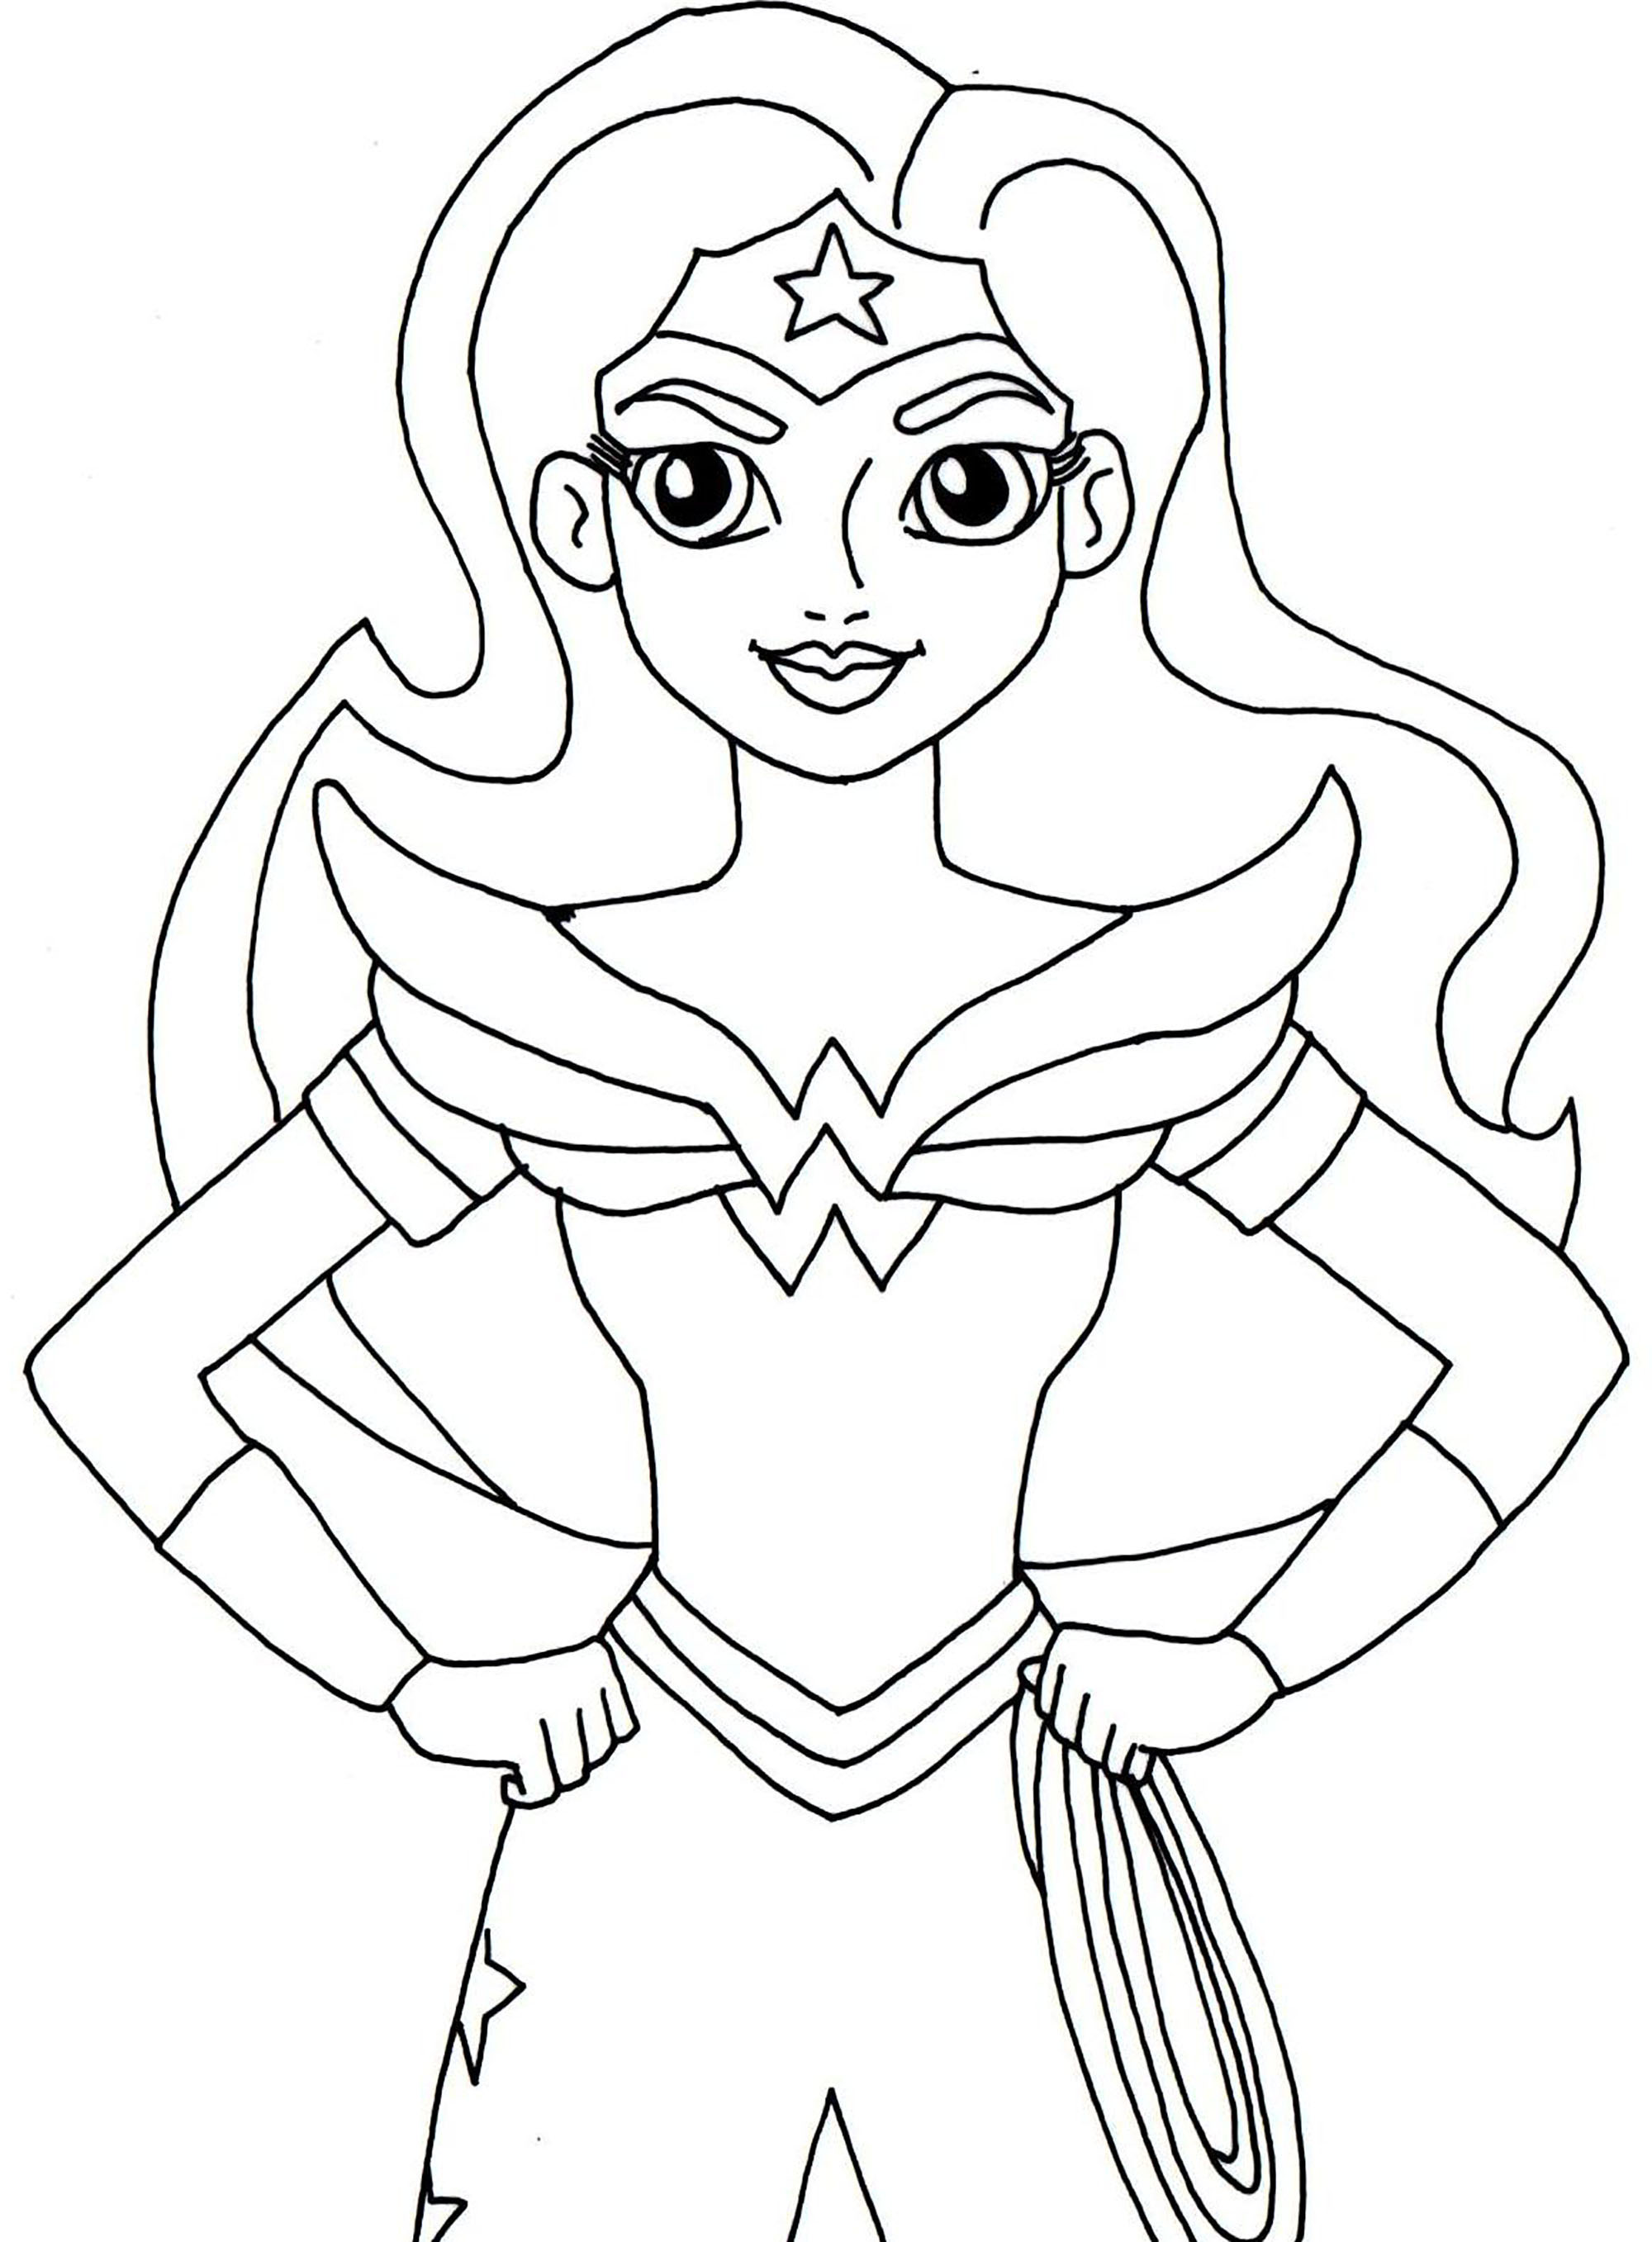 958 Unicorn Wonder Woman Coloring Pages with Printable